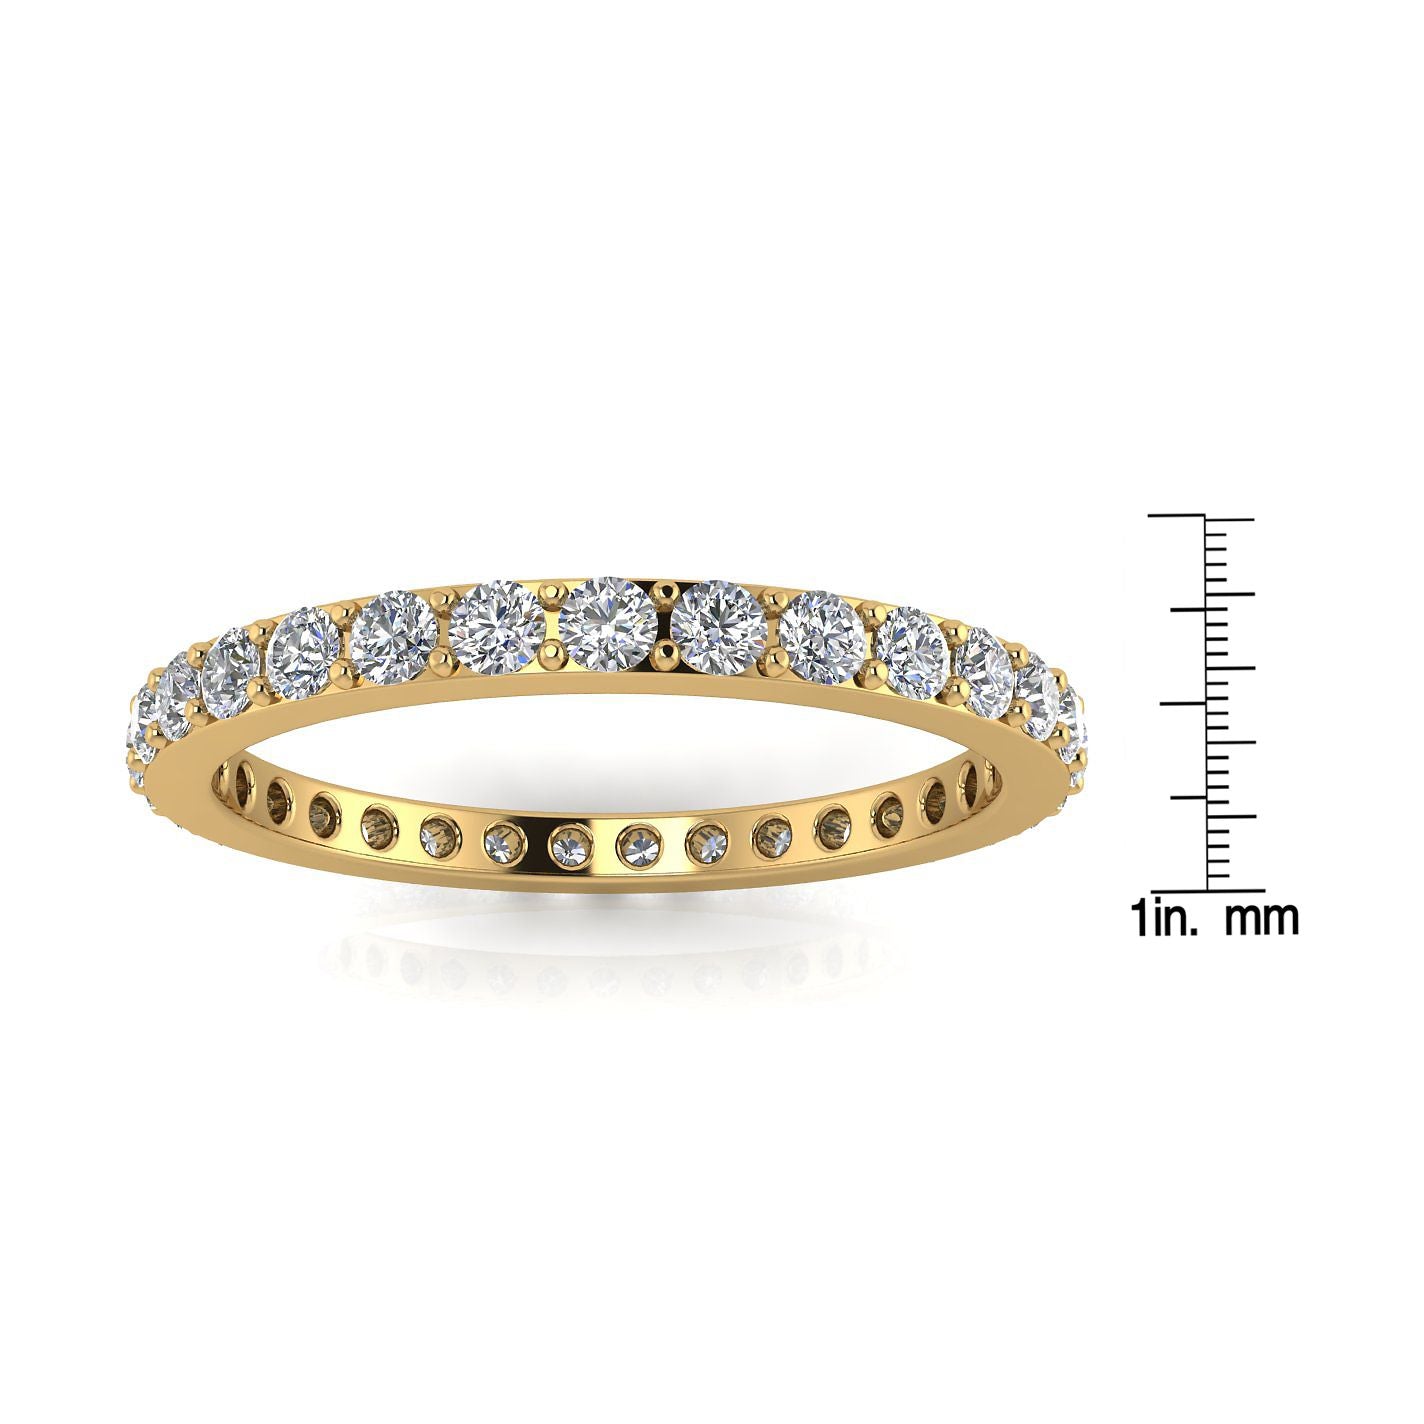 Round Brilliant Cut Diamond Pave Set Eternity Ring In 14k Yellow Gold  (1.31ct. Tw.) Ring Size 4